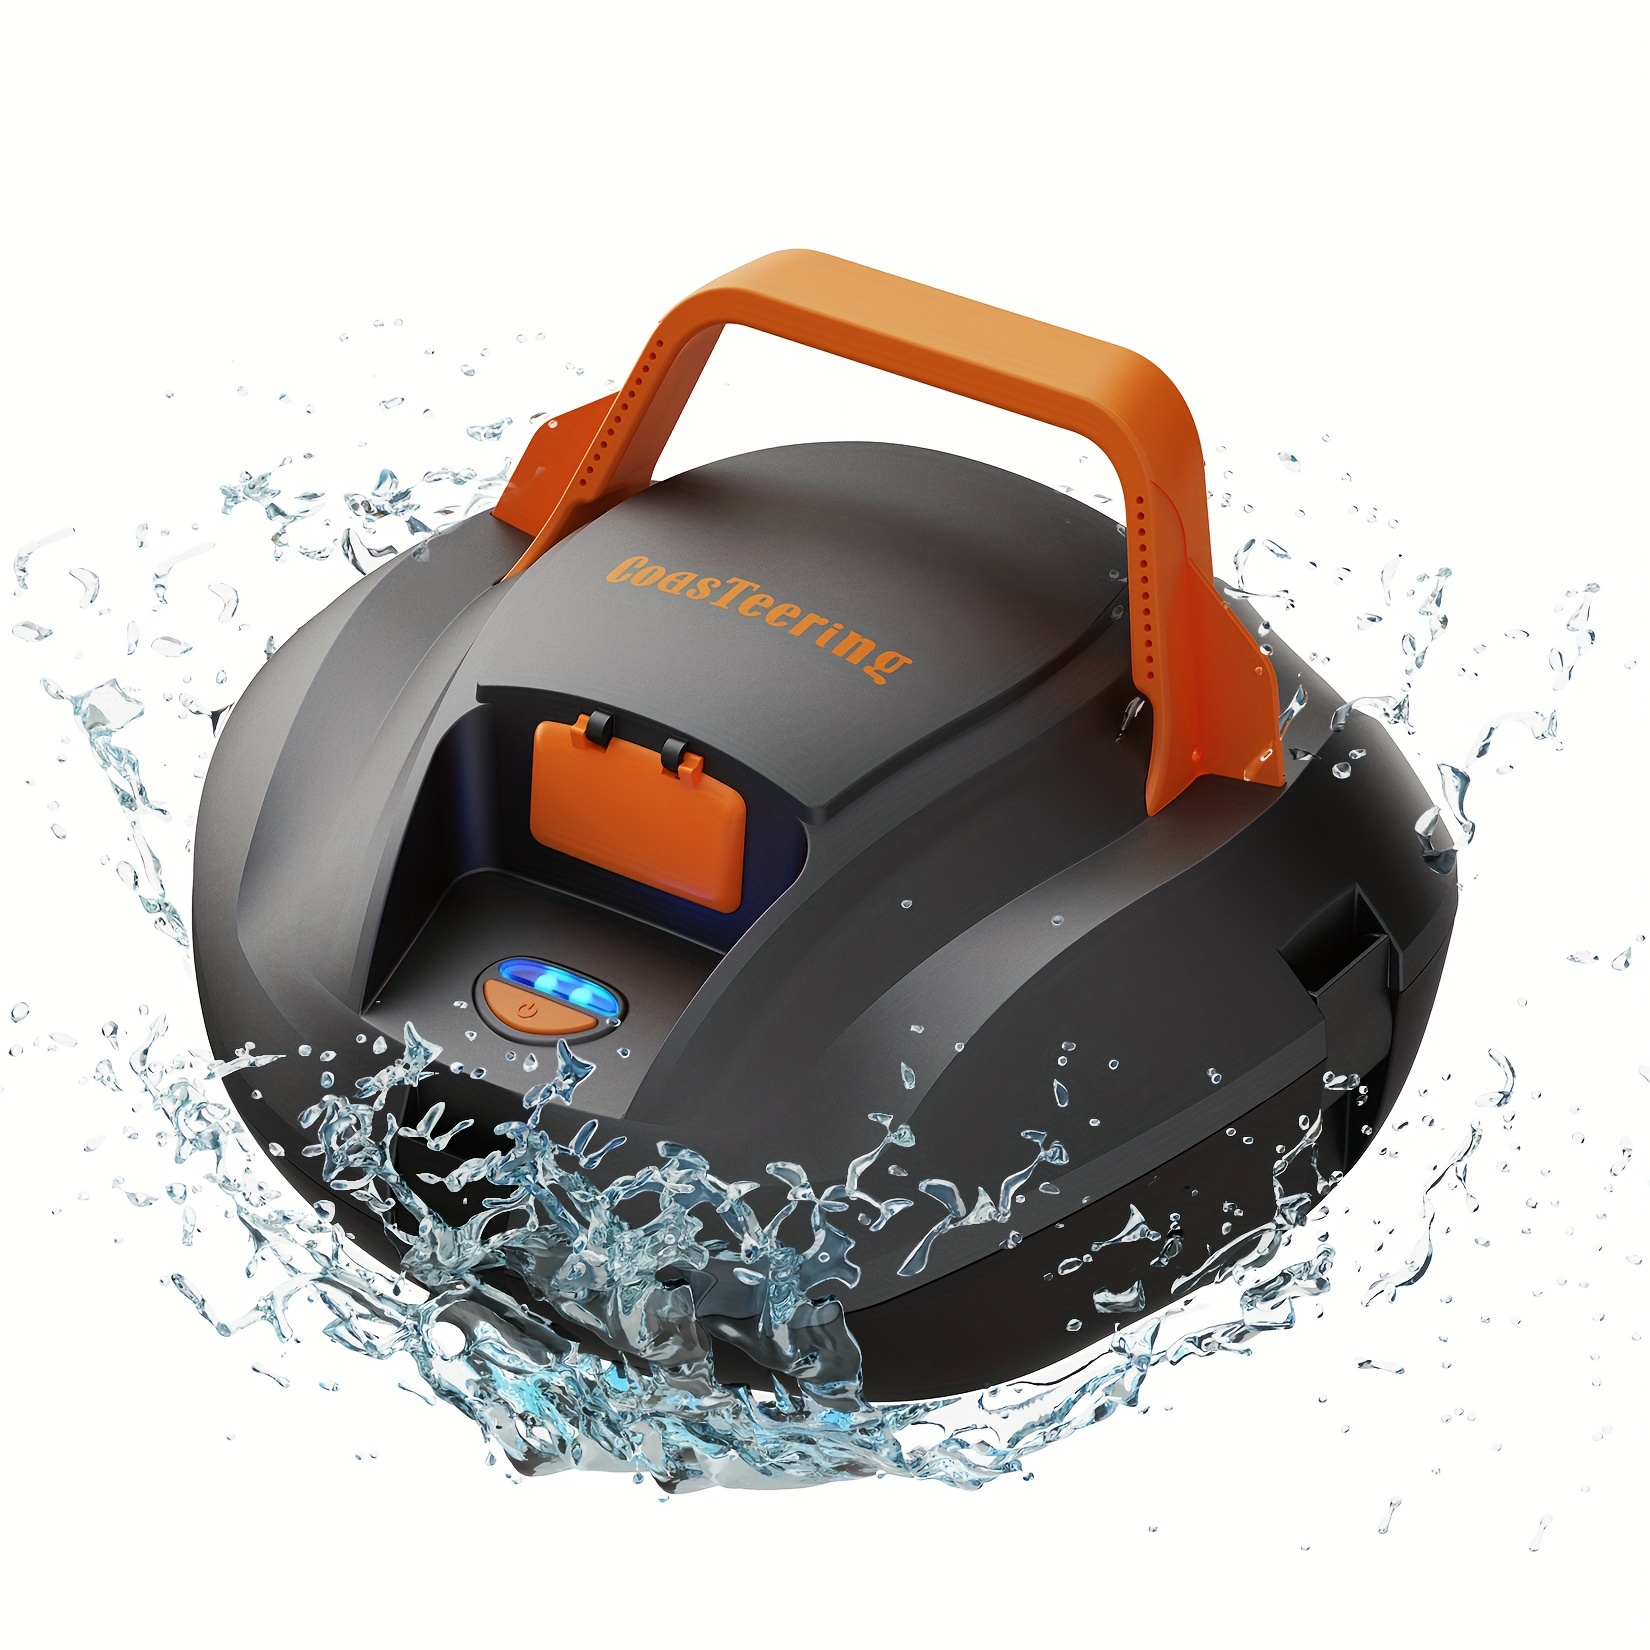 

Cordless Robotic Pool Vacuum Cleaner, Pool Cleaner Robot With Powerful Suction, 100 Mins Runtime, Fast Charging, Ideal For Above Ground/ Inground Swimming Pool Up To 850 Sq.ft